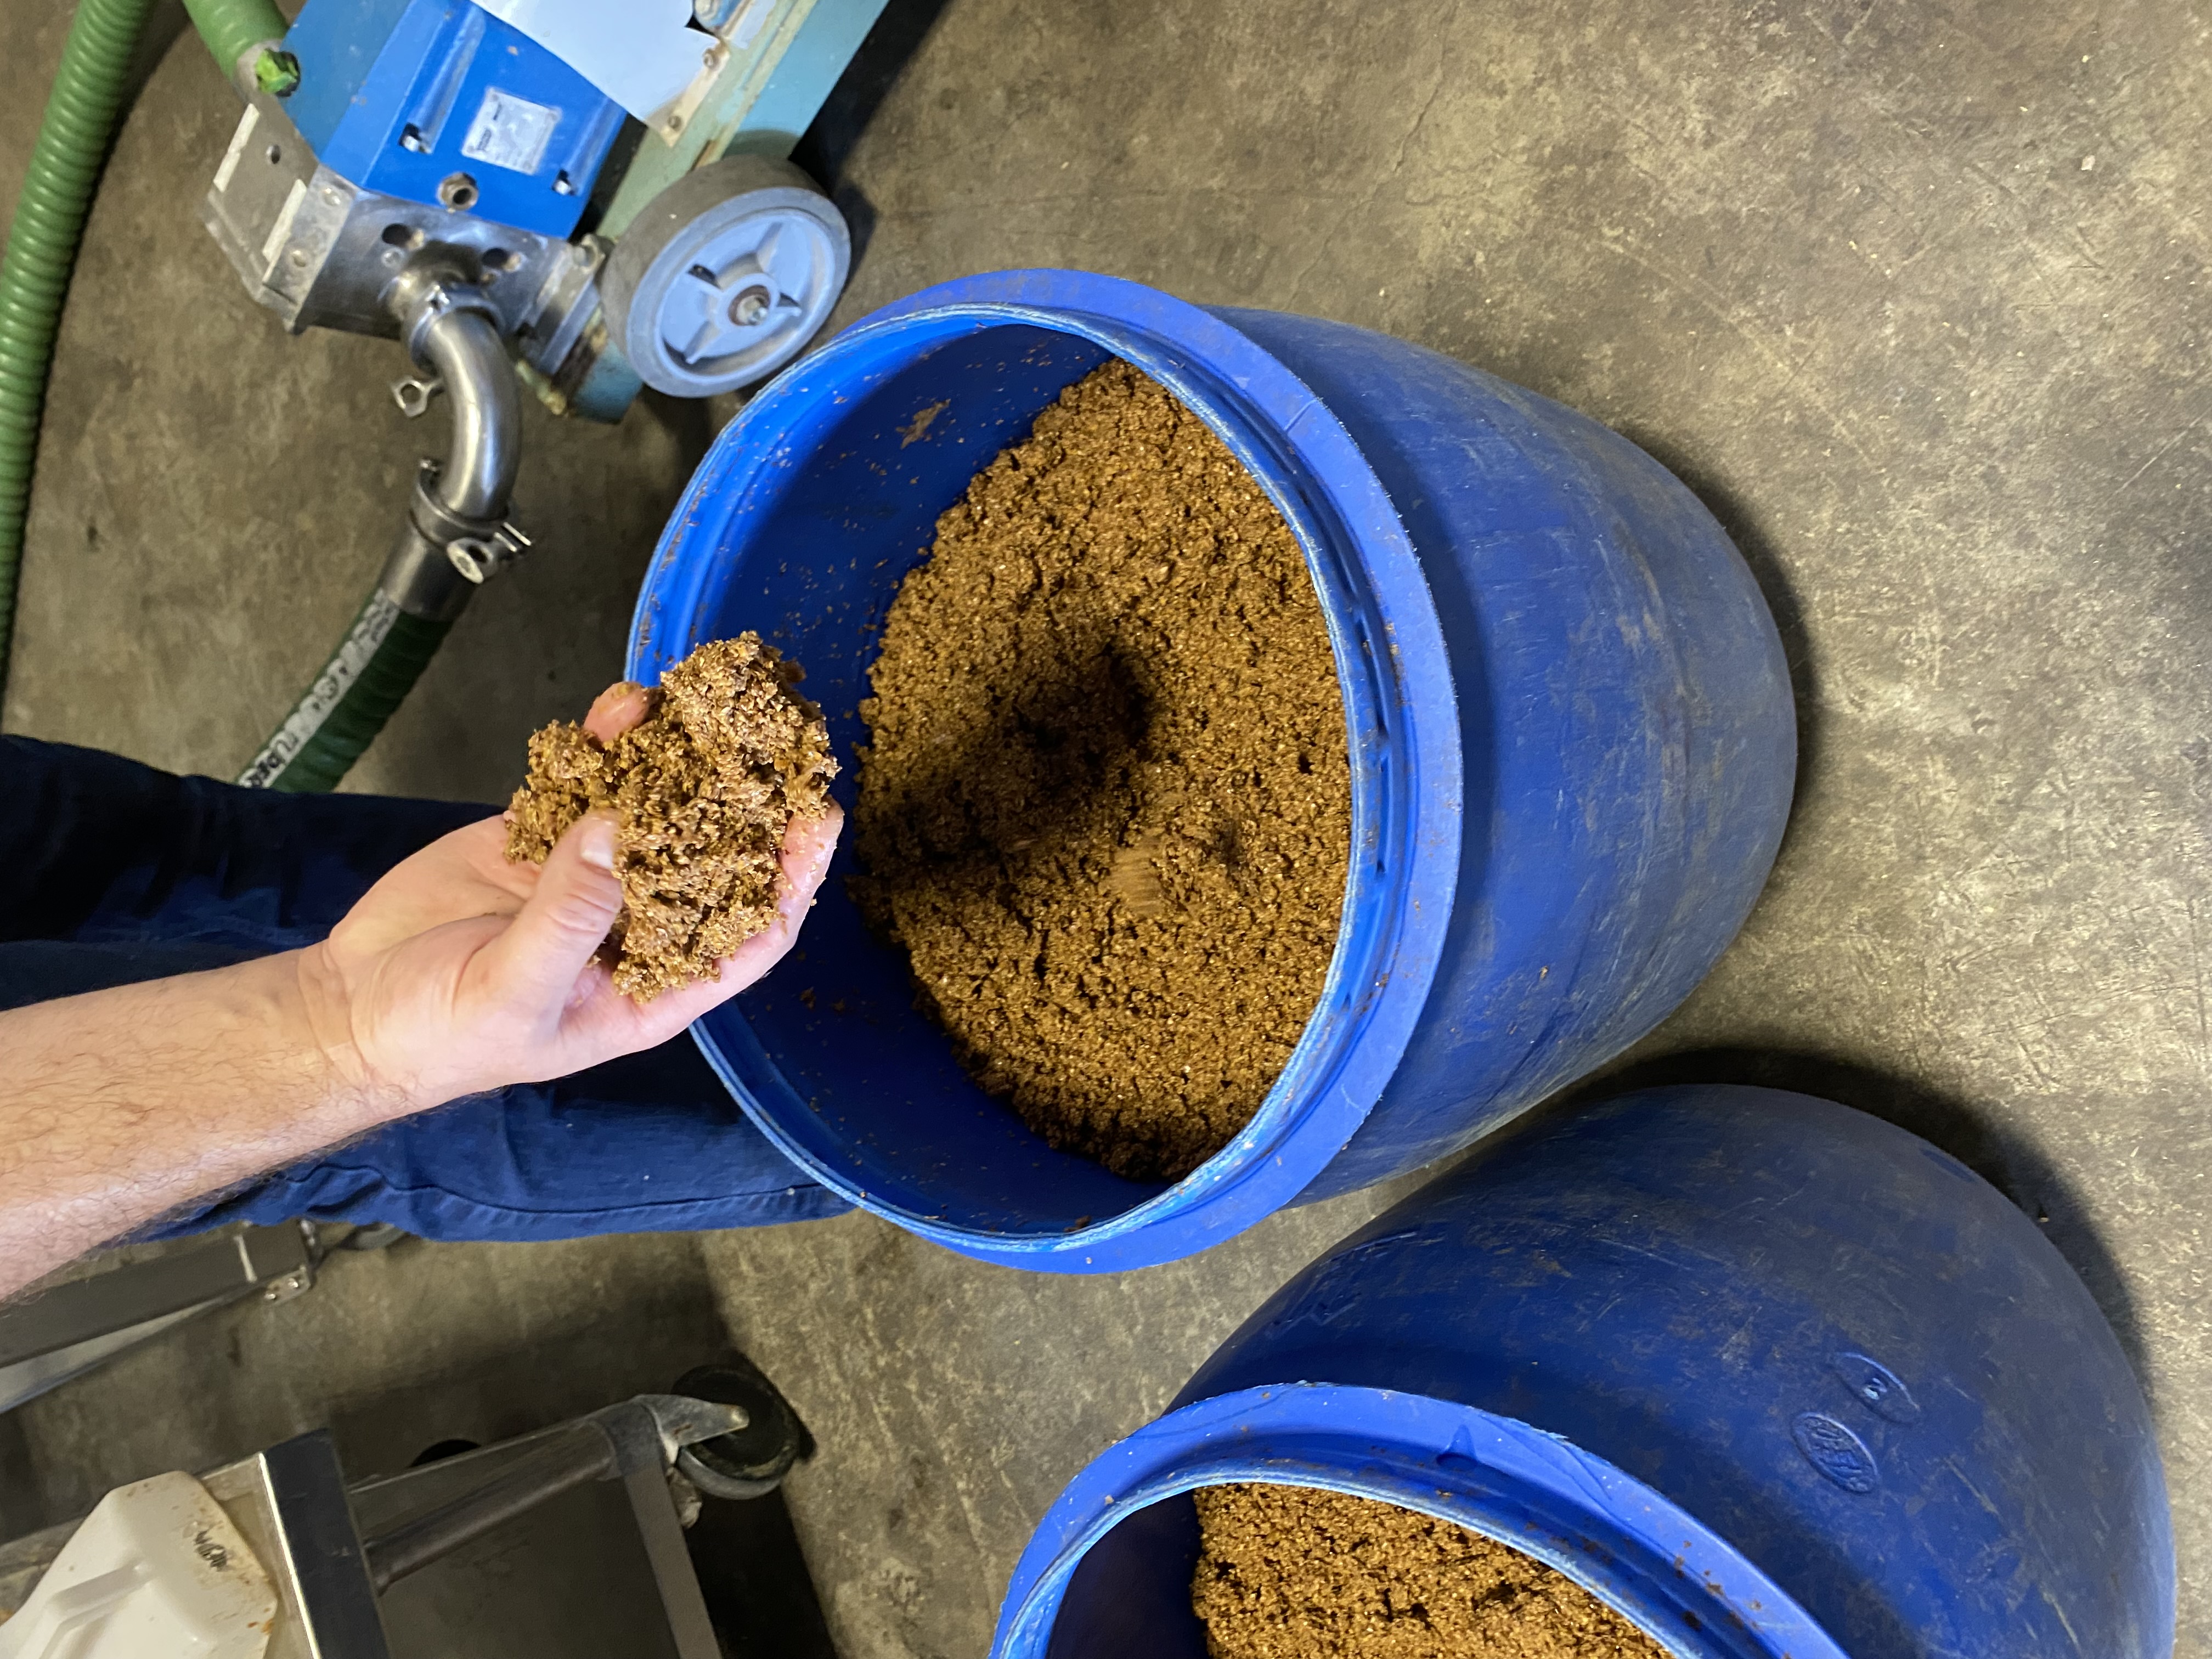 Silk City utilizes a CENTRI-SIFTER Centrifugal Dewatering Separator to dewater spent grain in a fraction of the time it took to manually screen spent grain.